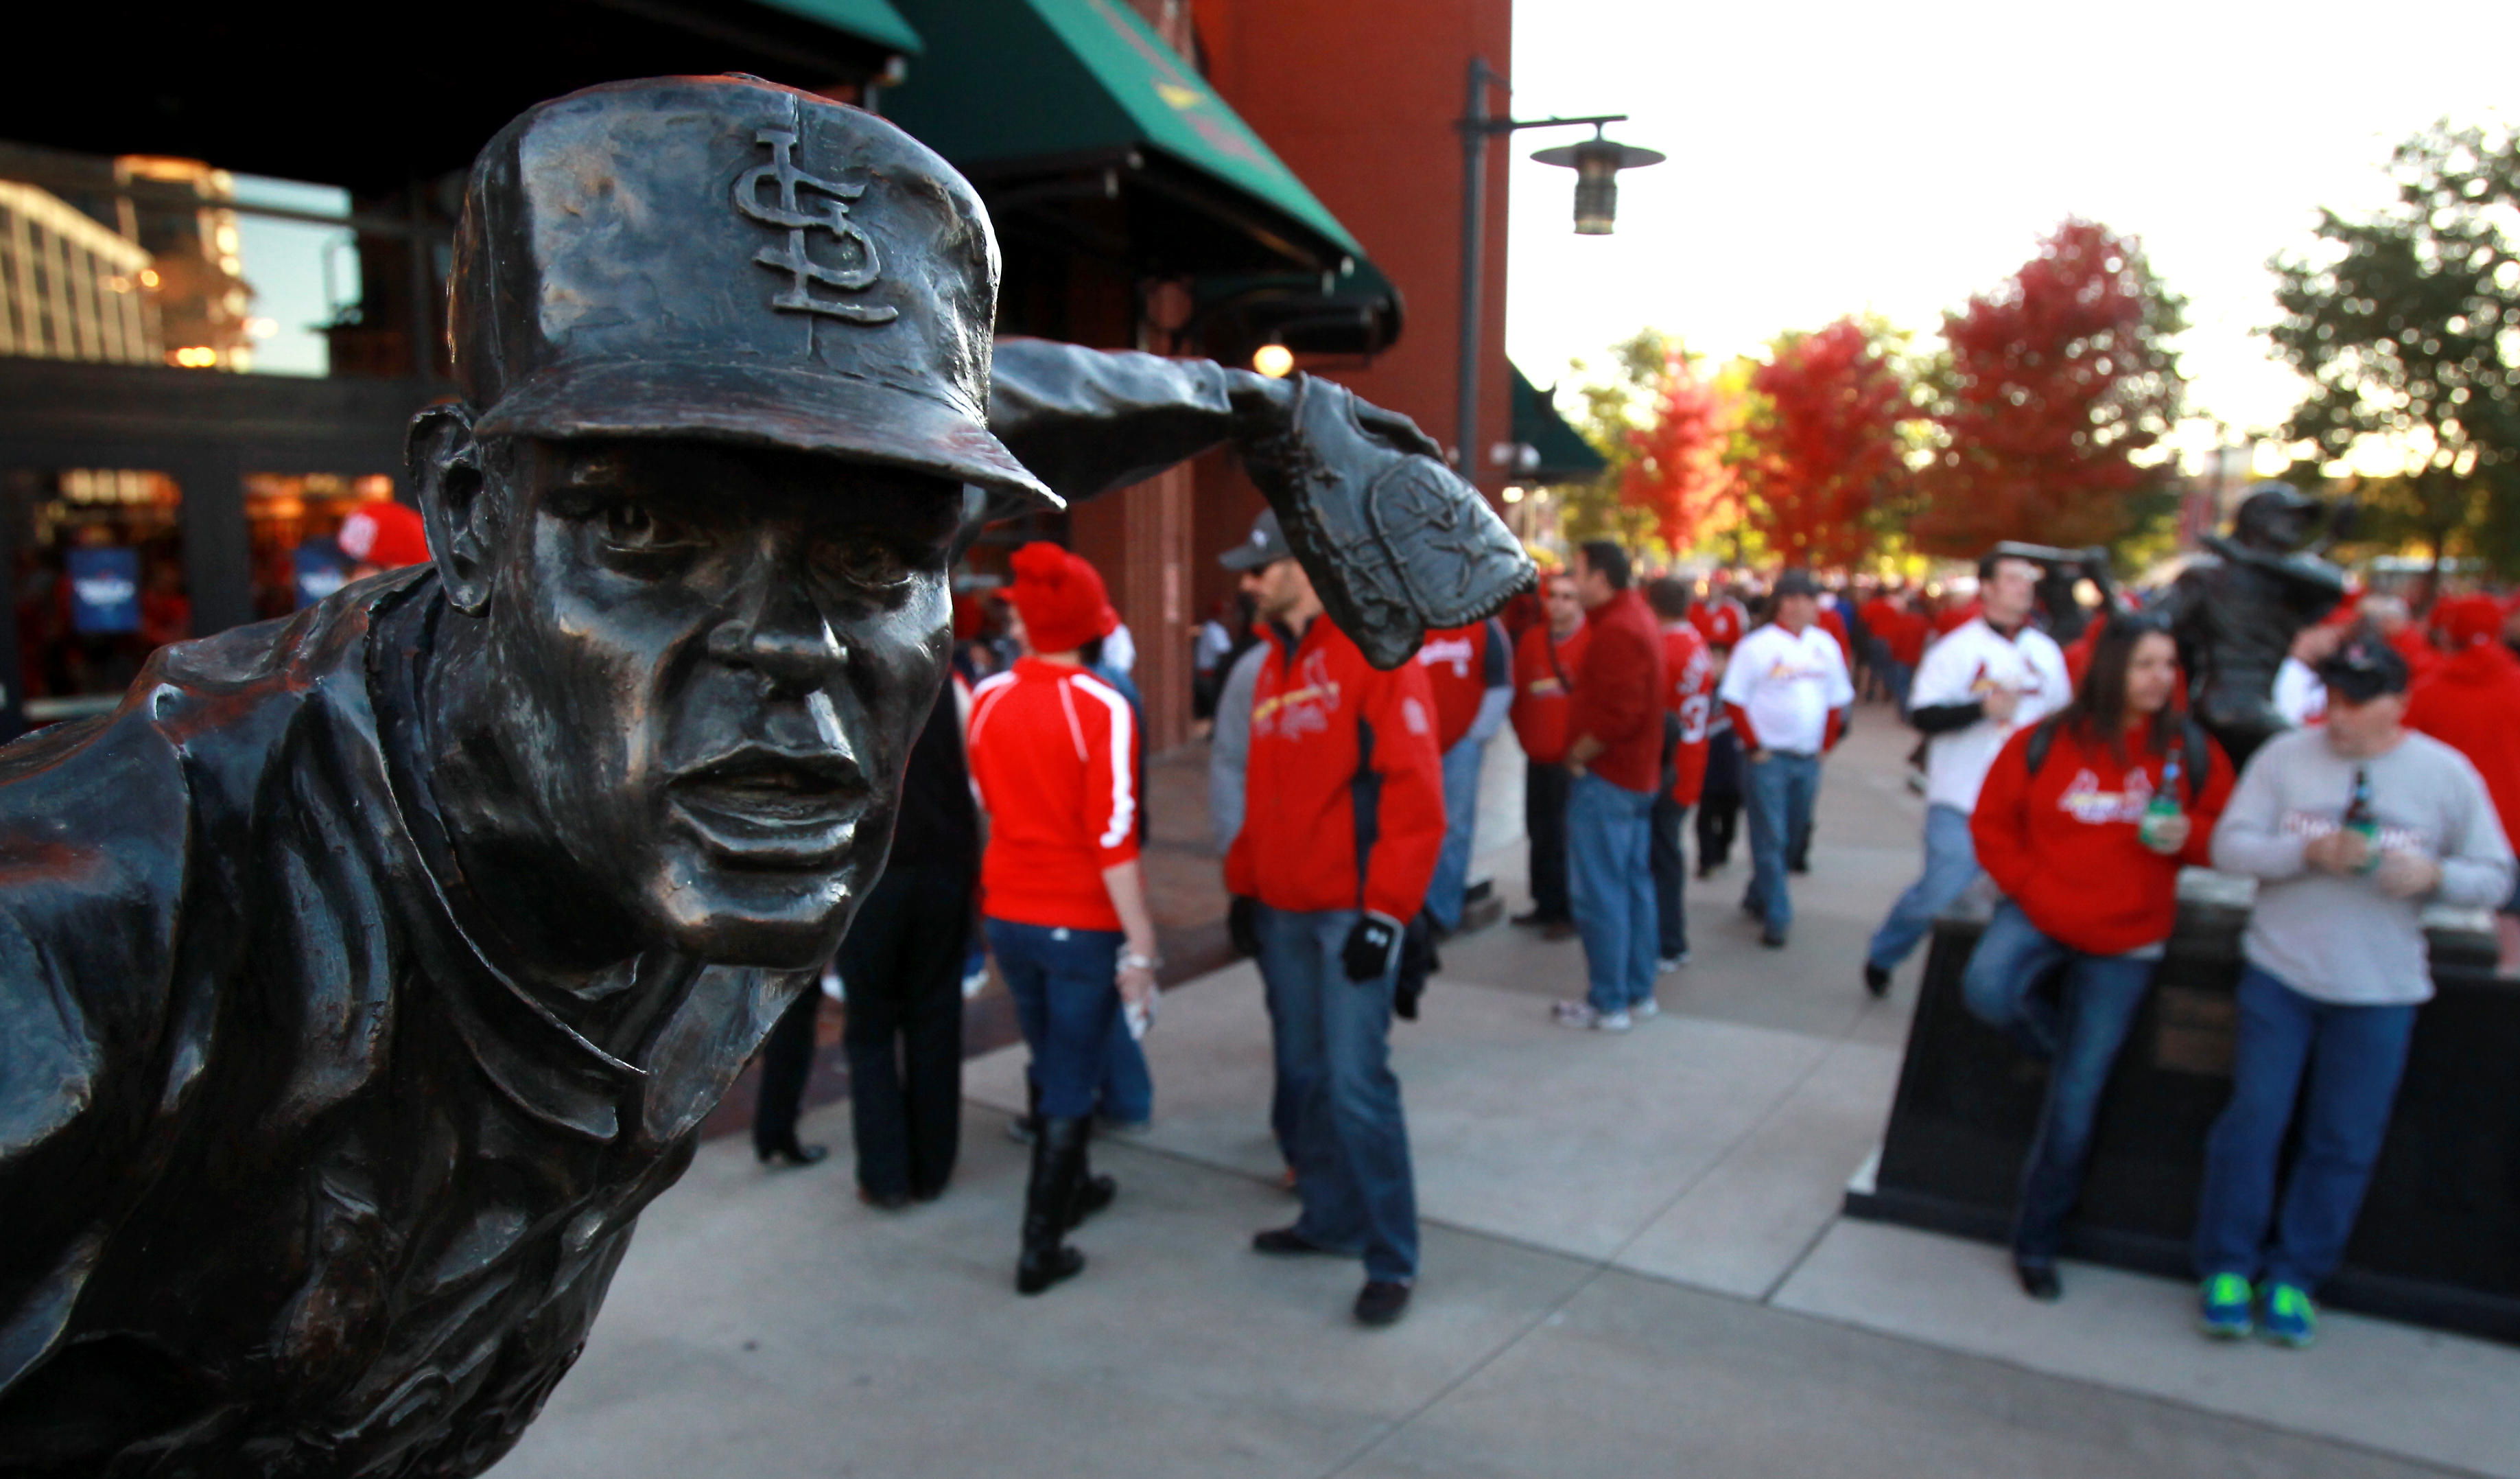 Cardinals pitching legend Bob Gibson diagnosed with pancreatic cancer 